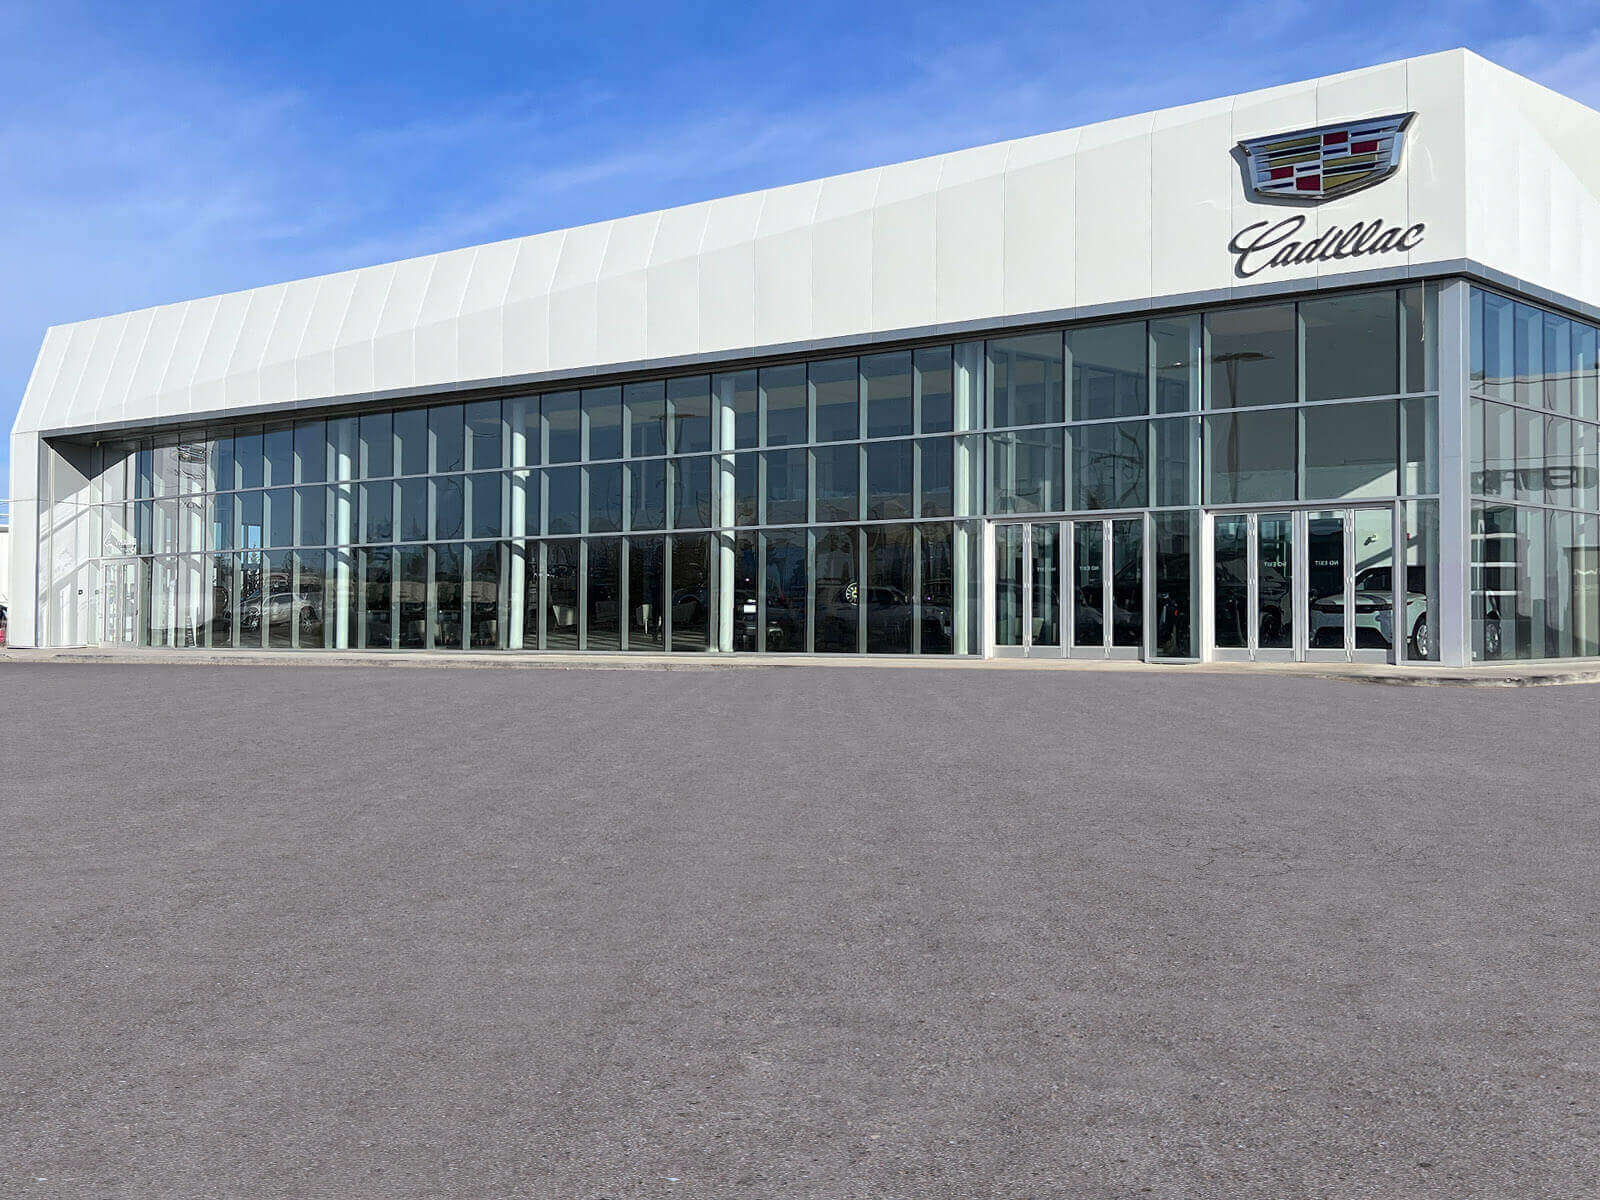 WOLFE CADILLAC, <span class="nowrap">YOUR CADILLAC DEALER IN EDMONTON </span>